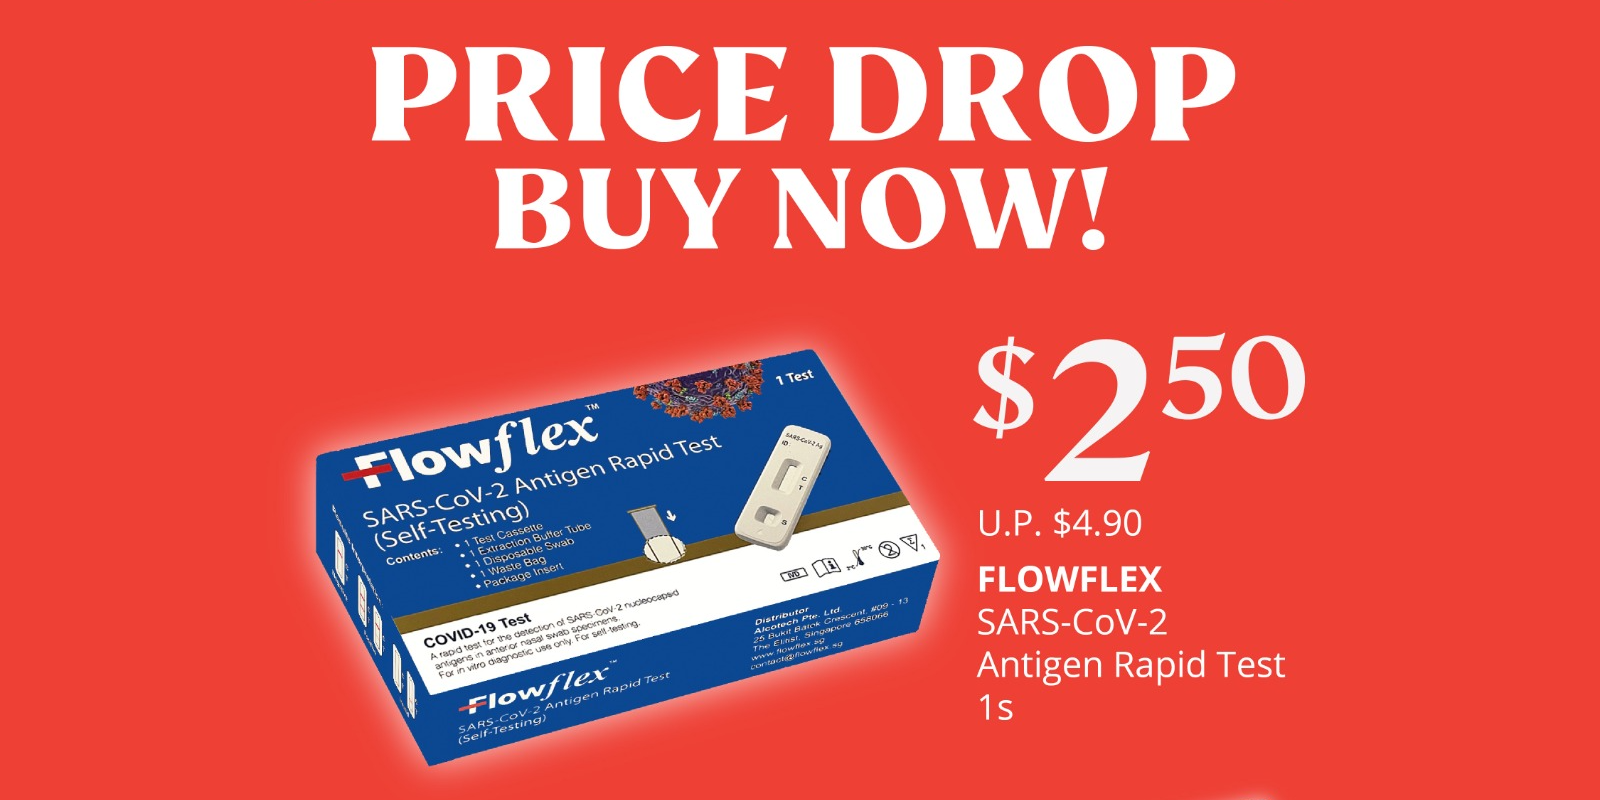 Stock up affordable Flowflex ART kits, almost 50% off!